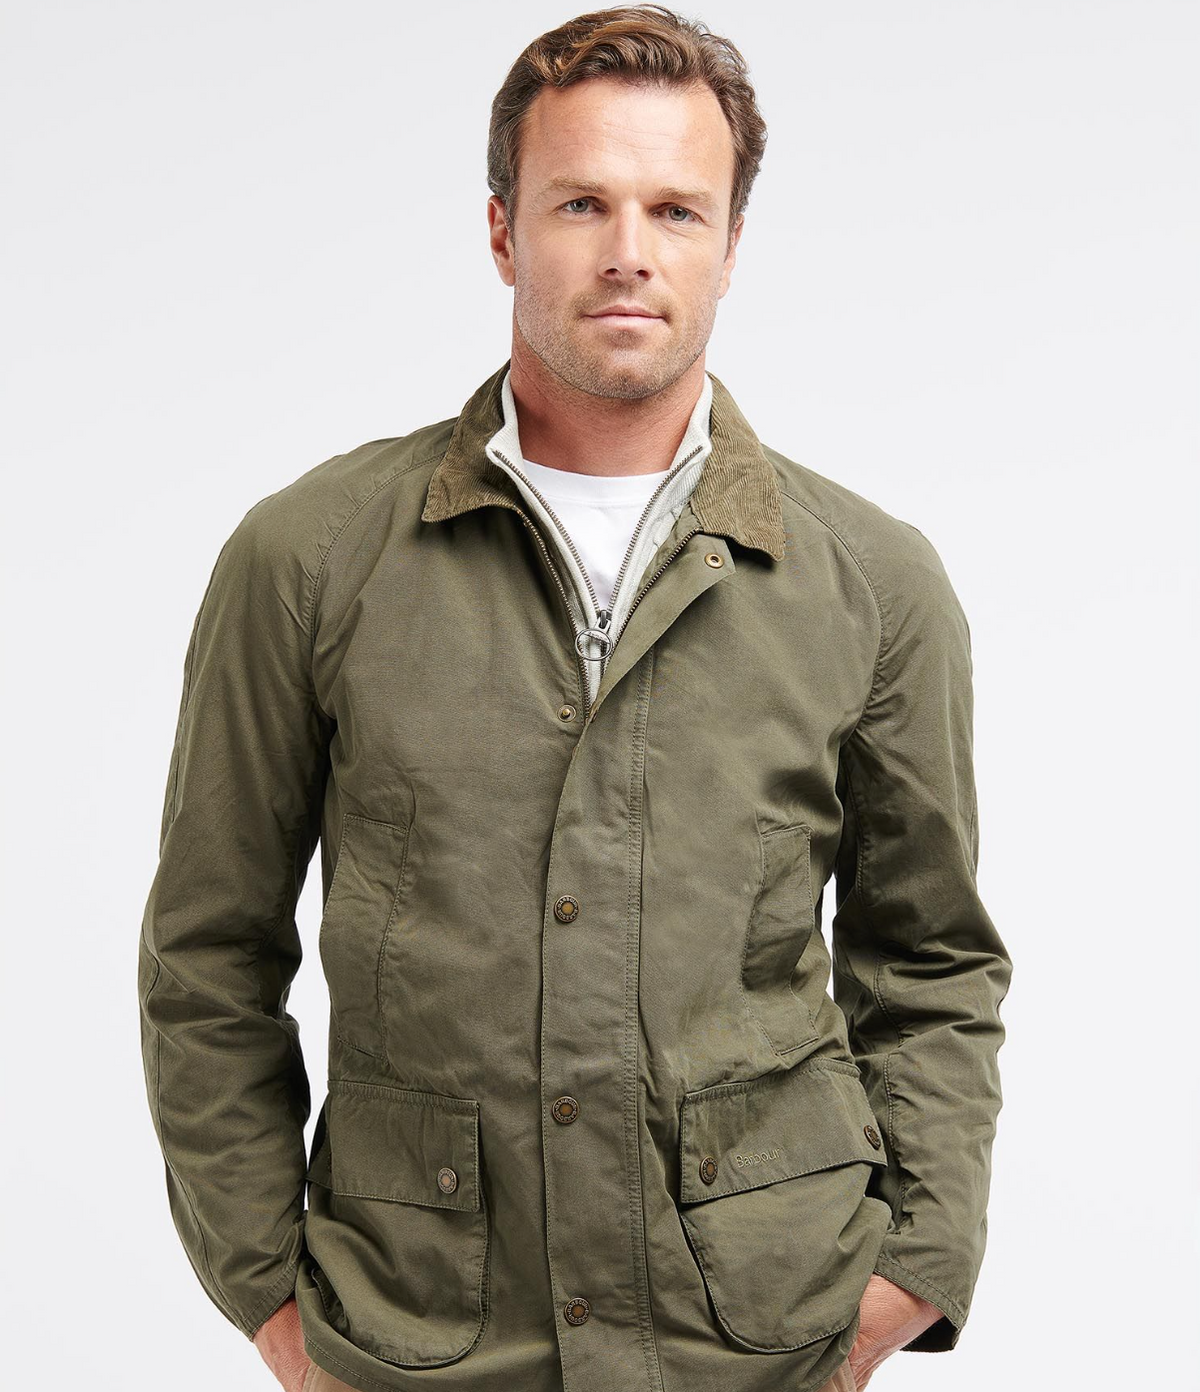 Barbour Men's Ashby Casual